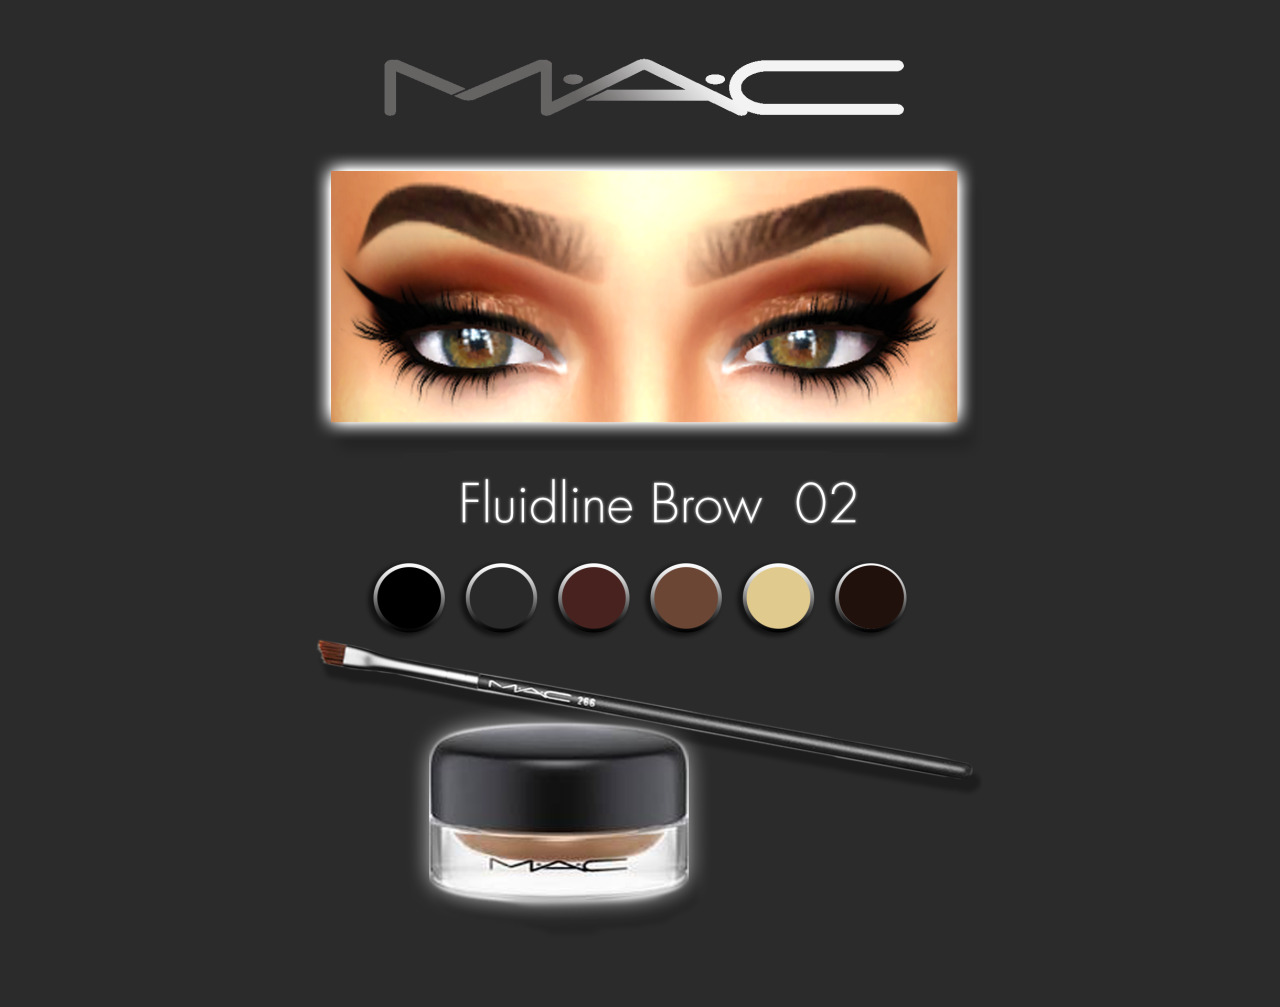 Fluidline Brow 02 by MAC
(This is a thinner version of Fluidline Brow 01 )
** For a perfectly tailored finish, a waterproof tinted gel for a bold and long-lasting appeal. Available in Ash Blonde, True Brunette, Amber, Soft Brown, Dark Chocolate and...